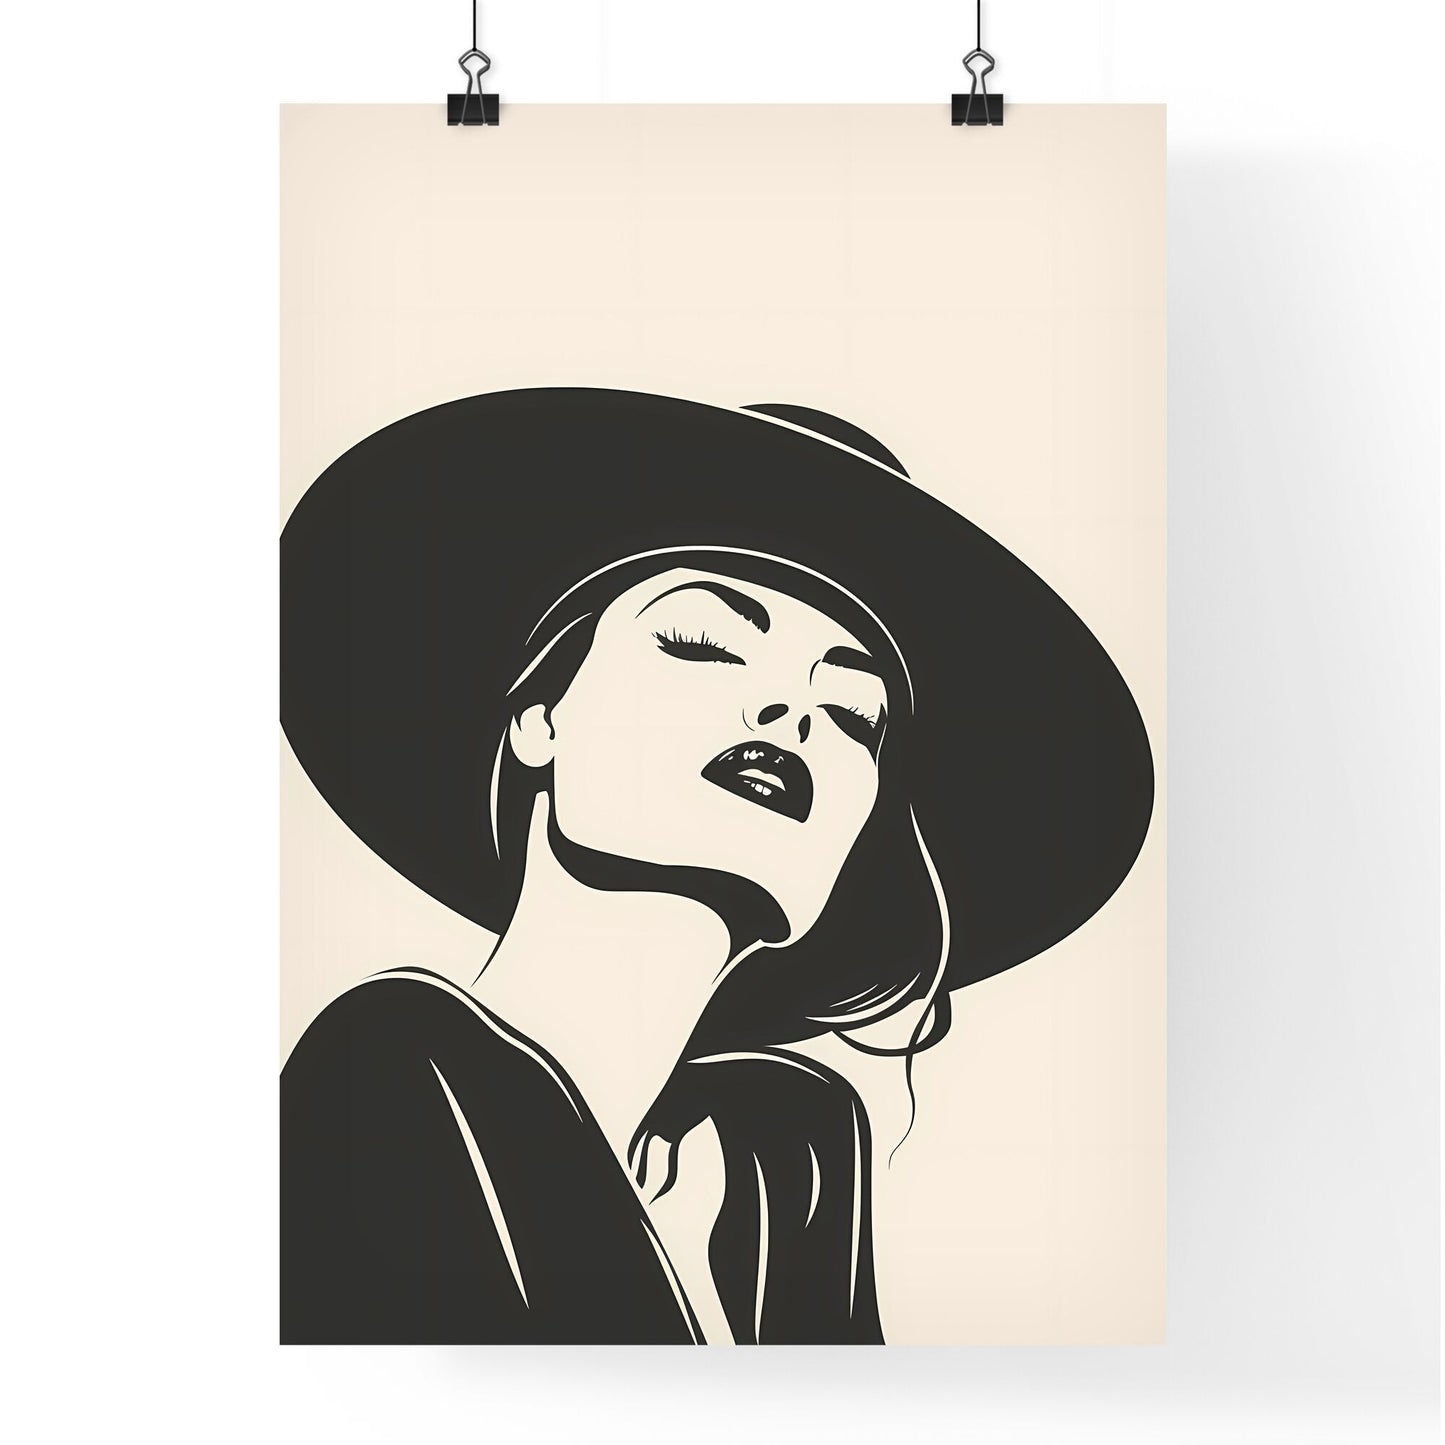 Minimalist Retro Fashion Art Poster: Black and White Illustration of a Hatted Woman Default Title